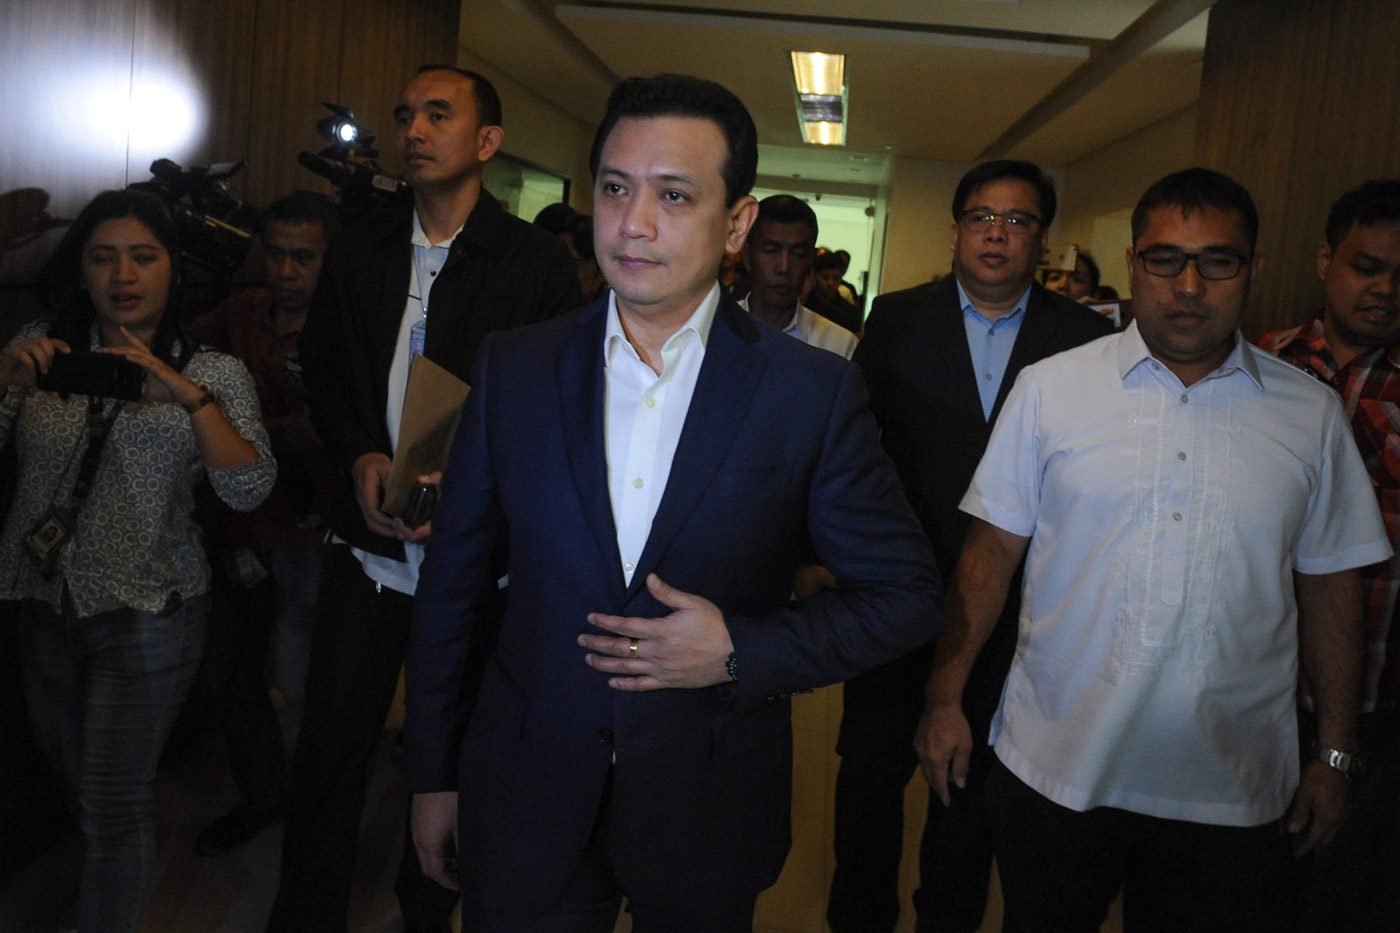 Next case for Trillanes: Charged with grave threat in Pasay